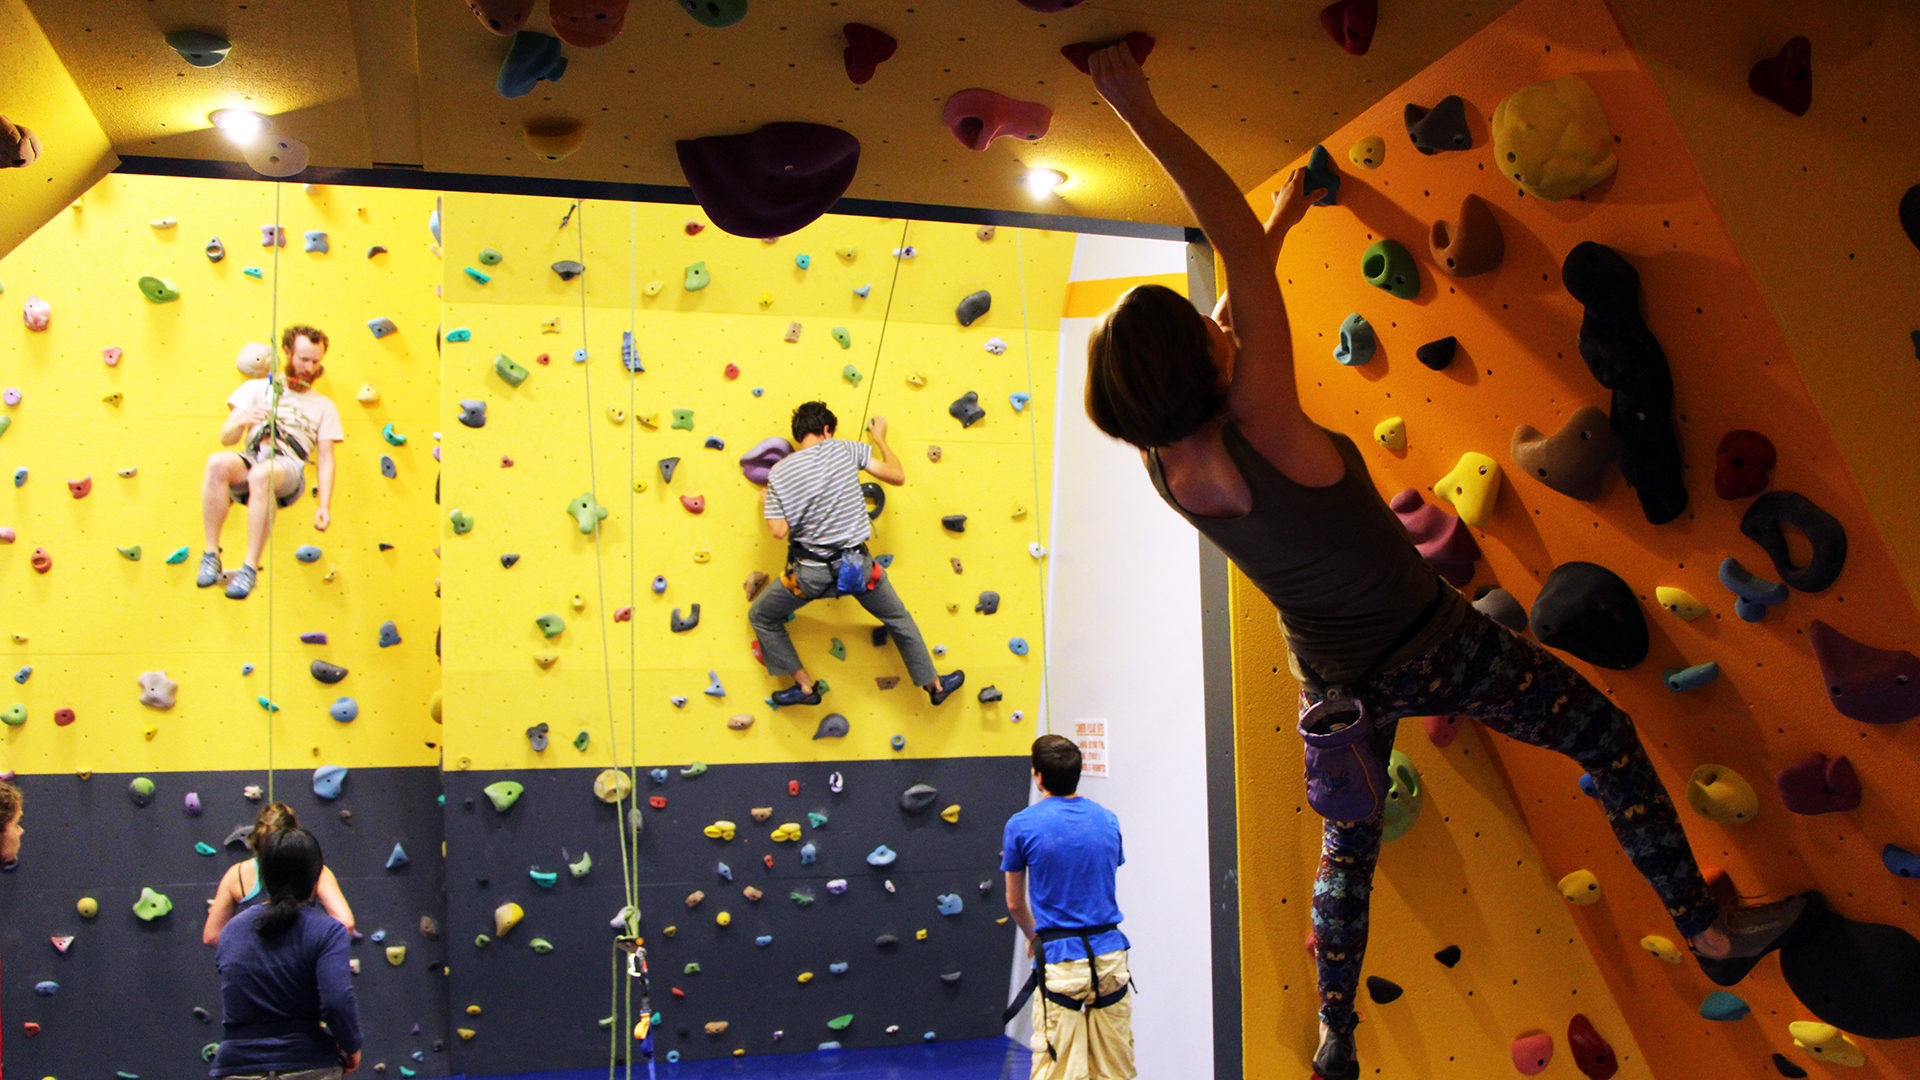 Rock Climbing: Climbing Skills And Techniques improvement In The Gym, Artificial Rock Wall Climbing In The Gym. 1920x1080 Full HD Background.